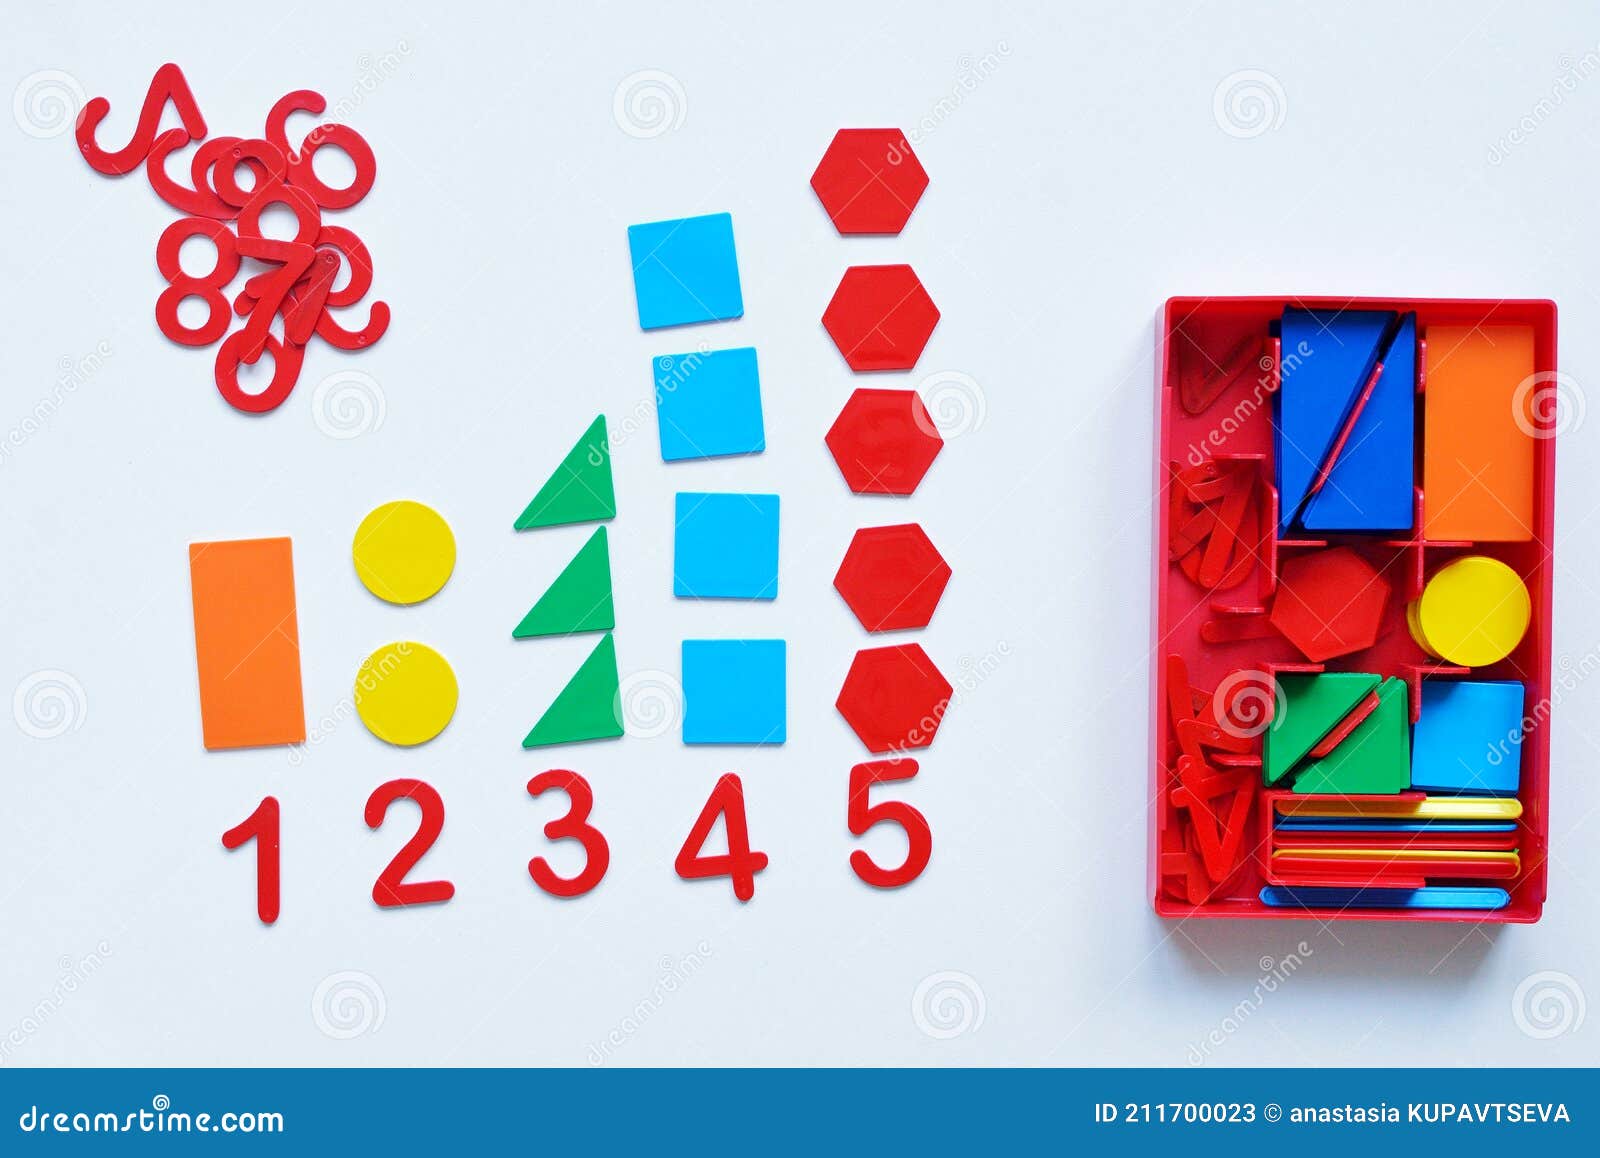 the child learns number line and geometric s. the preschooler works with montessori material. educational logic toys for kid